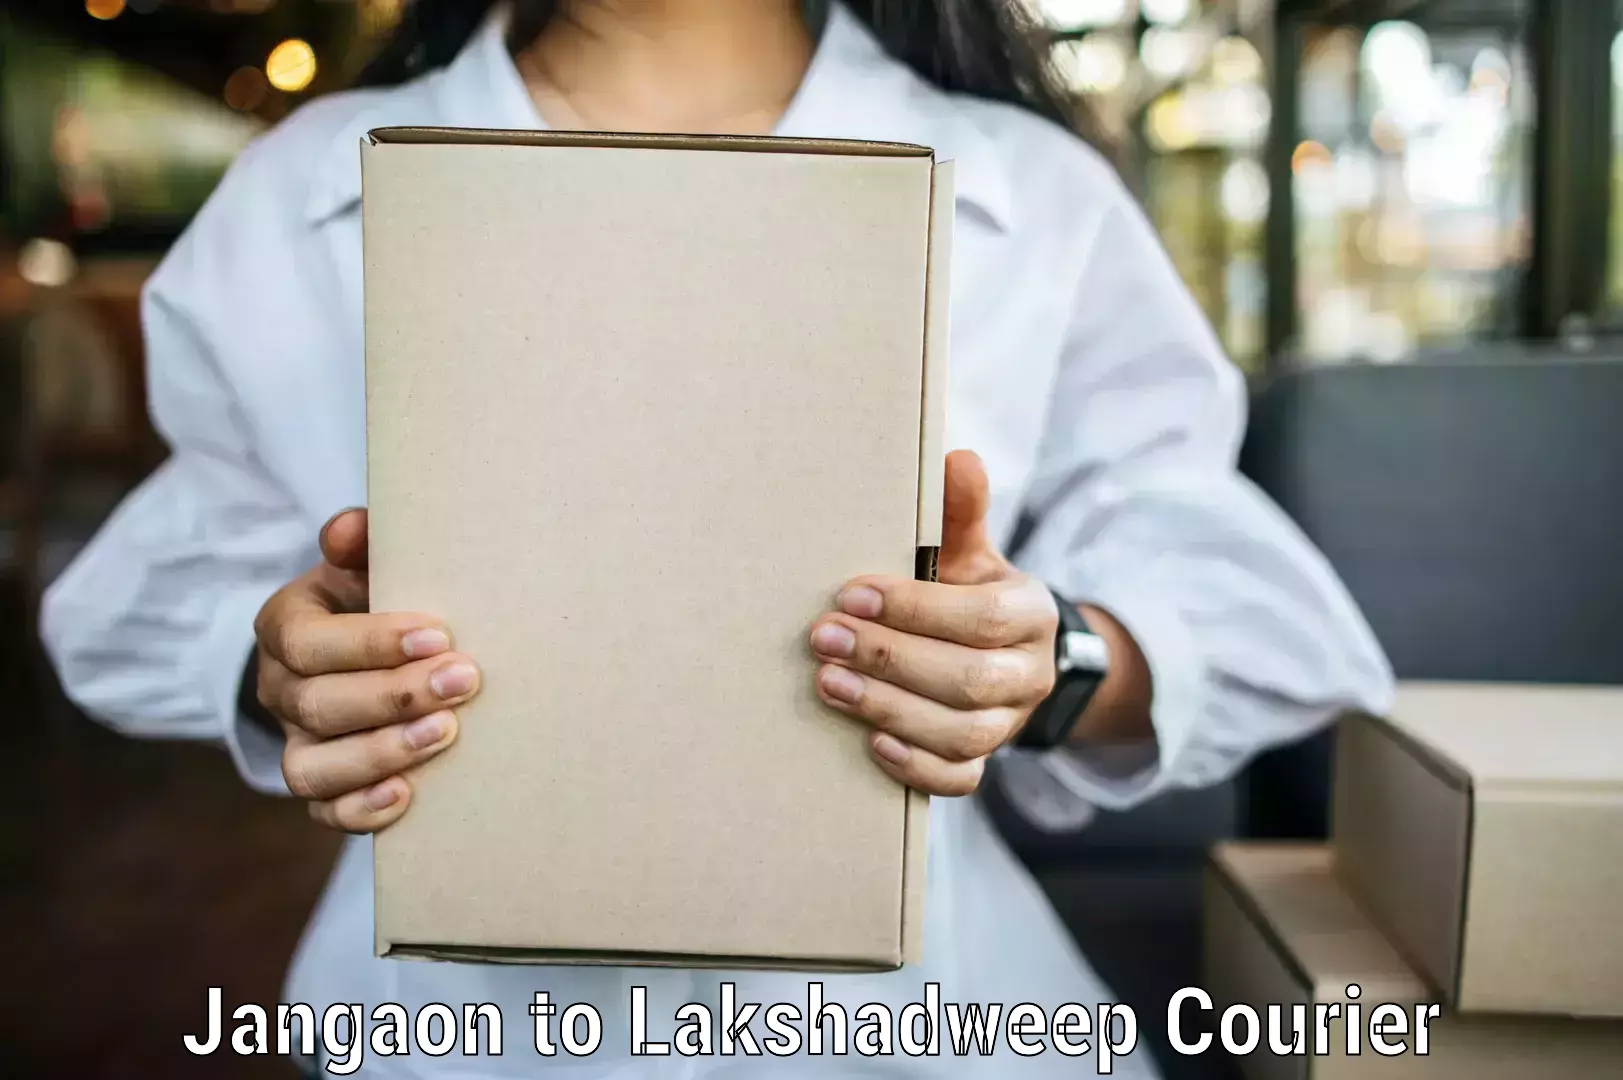 Next-day delivery options Jangaon to Lakshadweep